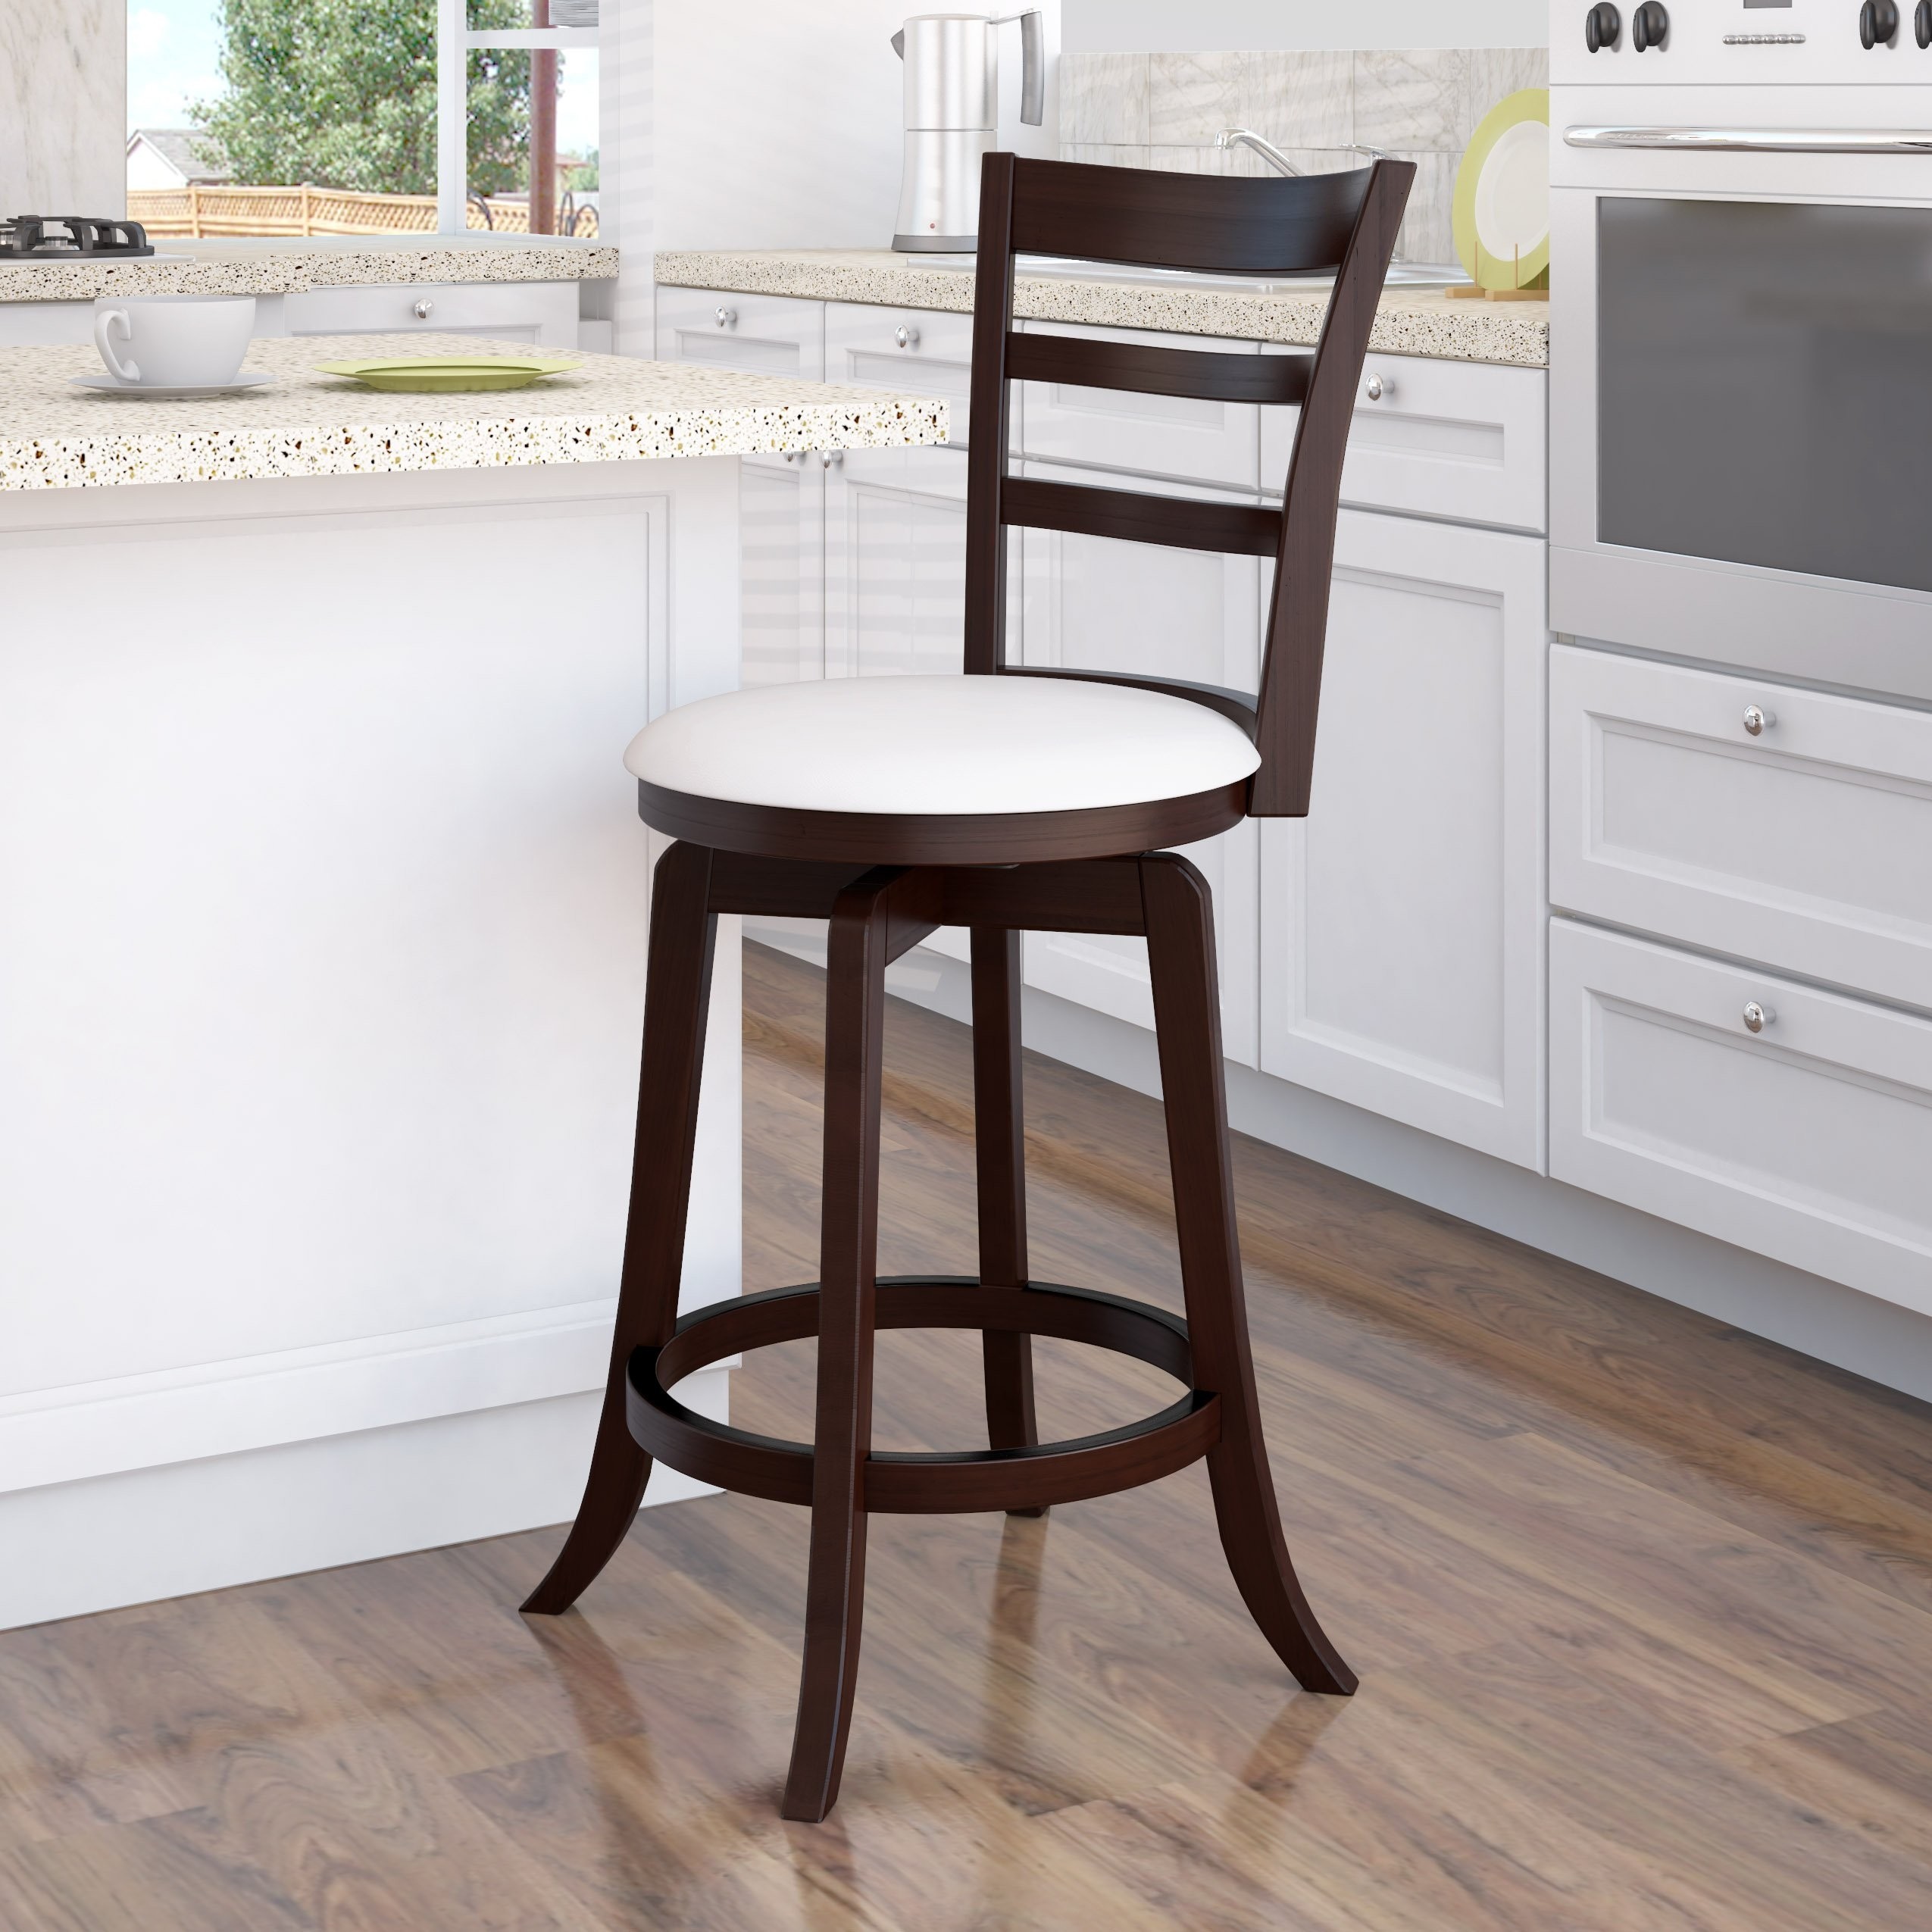 Bar stools 36 inch seat height 2